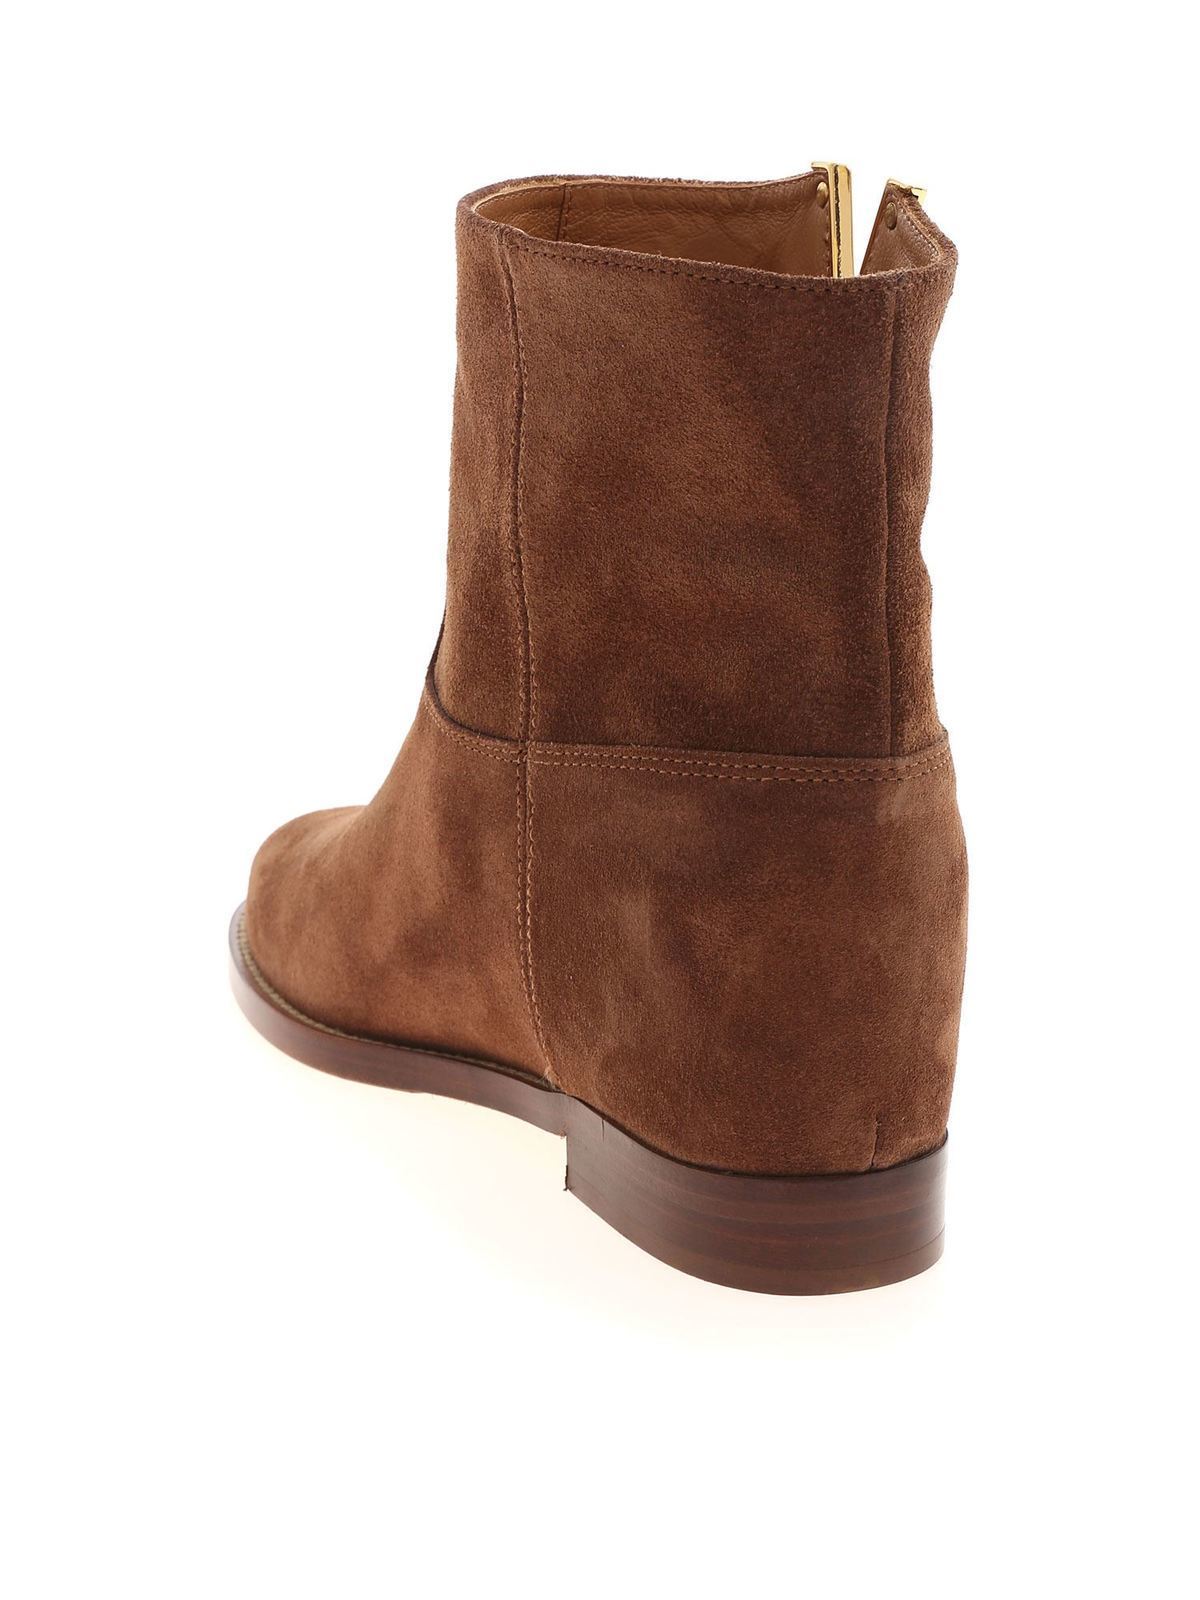 homoseksueel toelage vermomming Ankle boots Via Roma 15 - V suede ankle boots in brown - 2576VELOURMARTORA